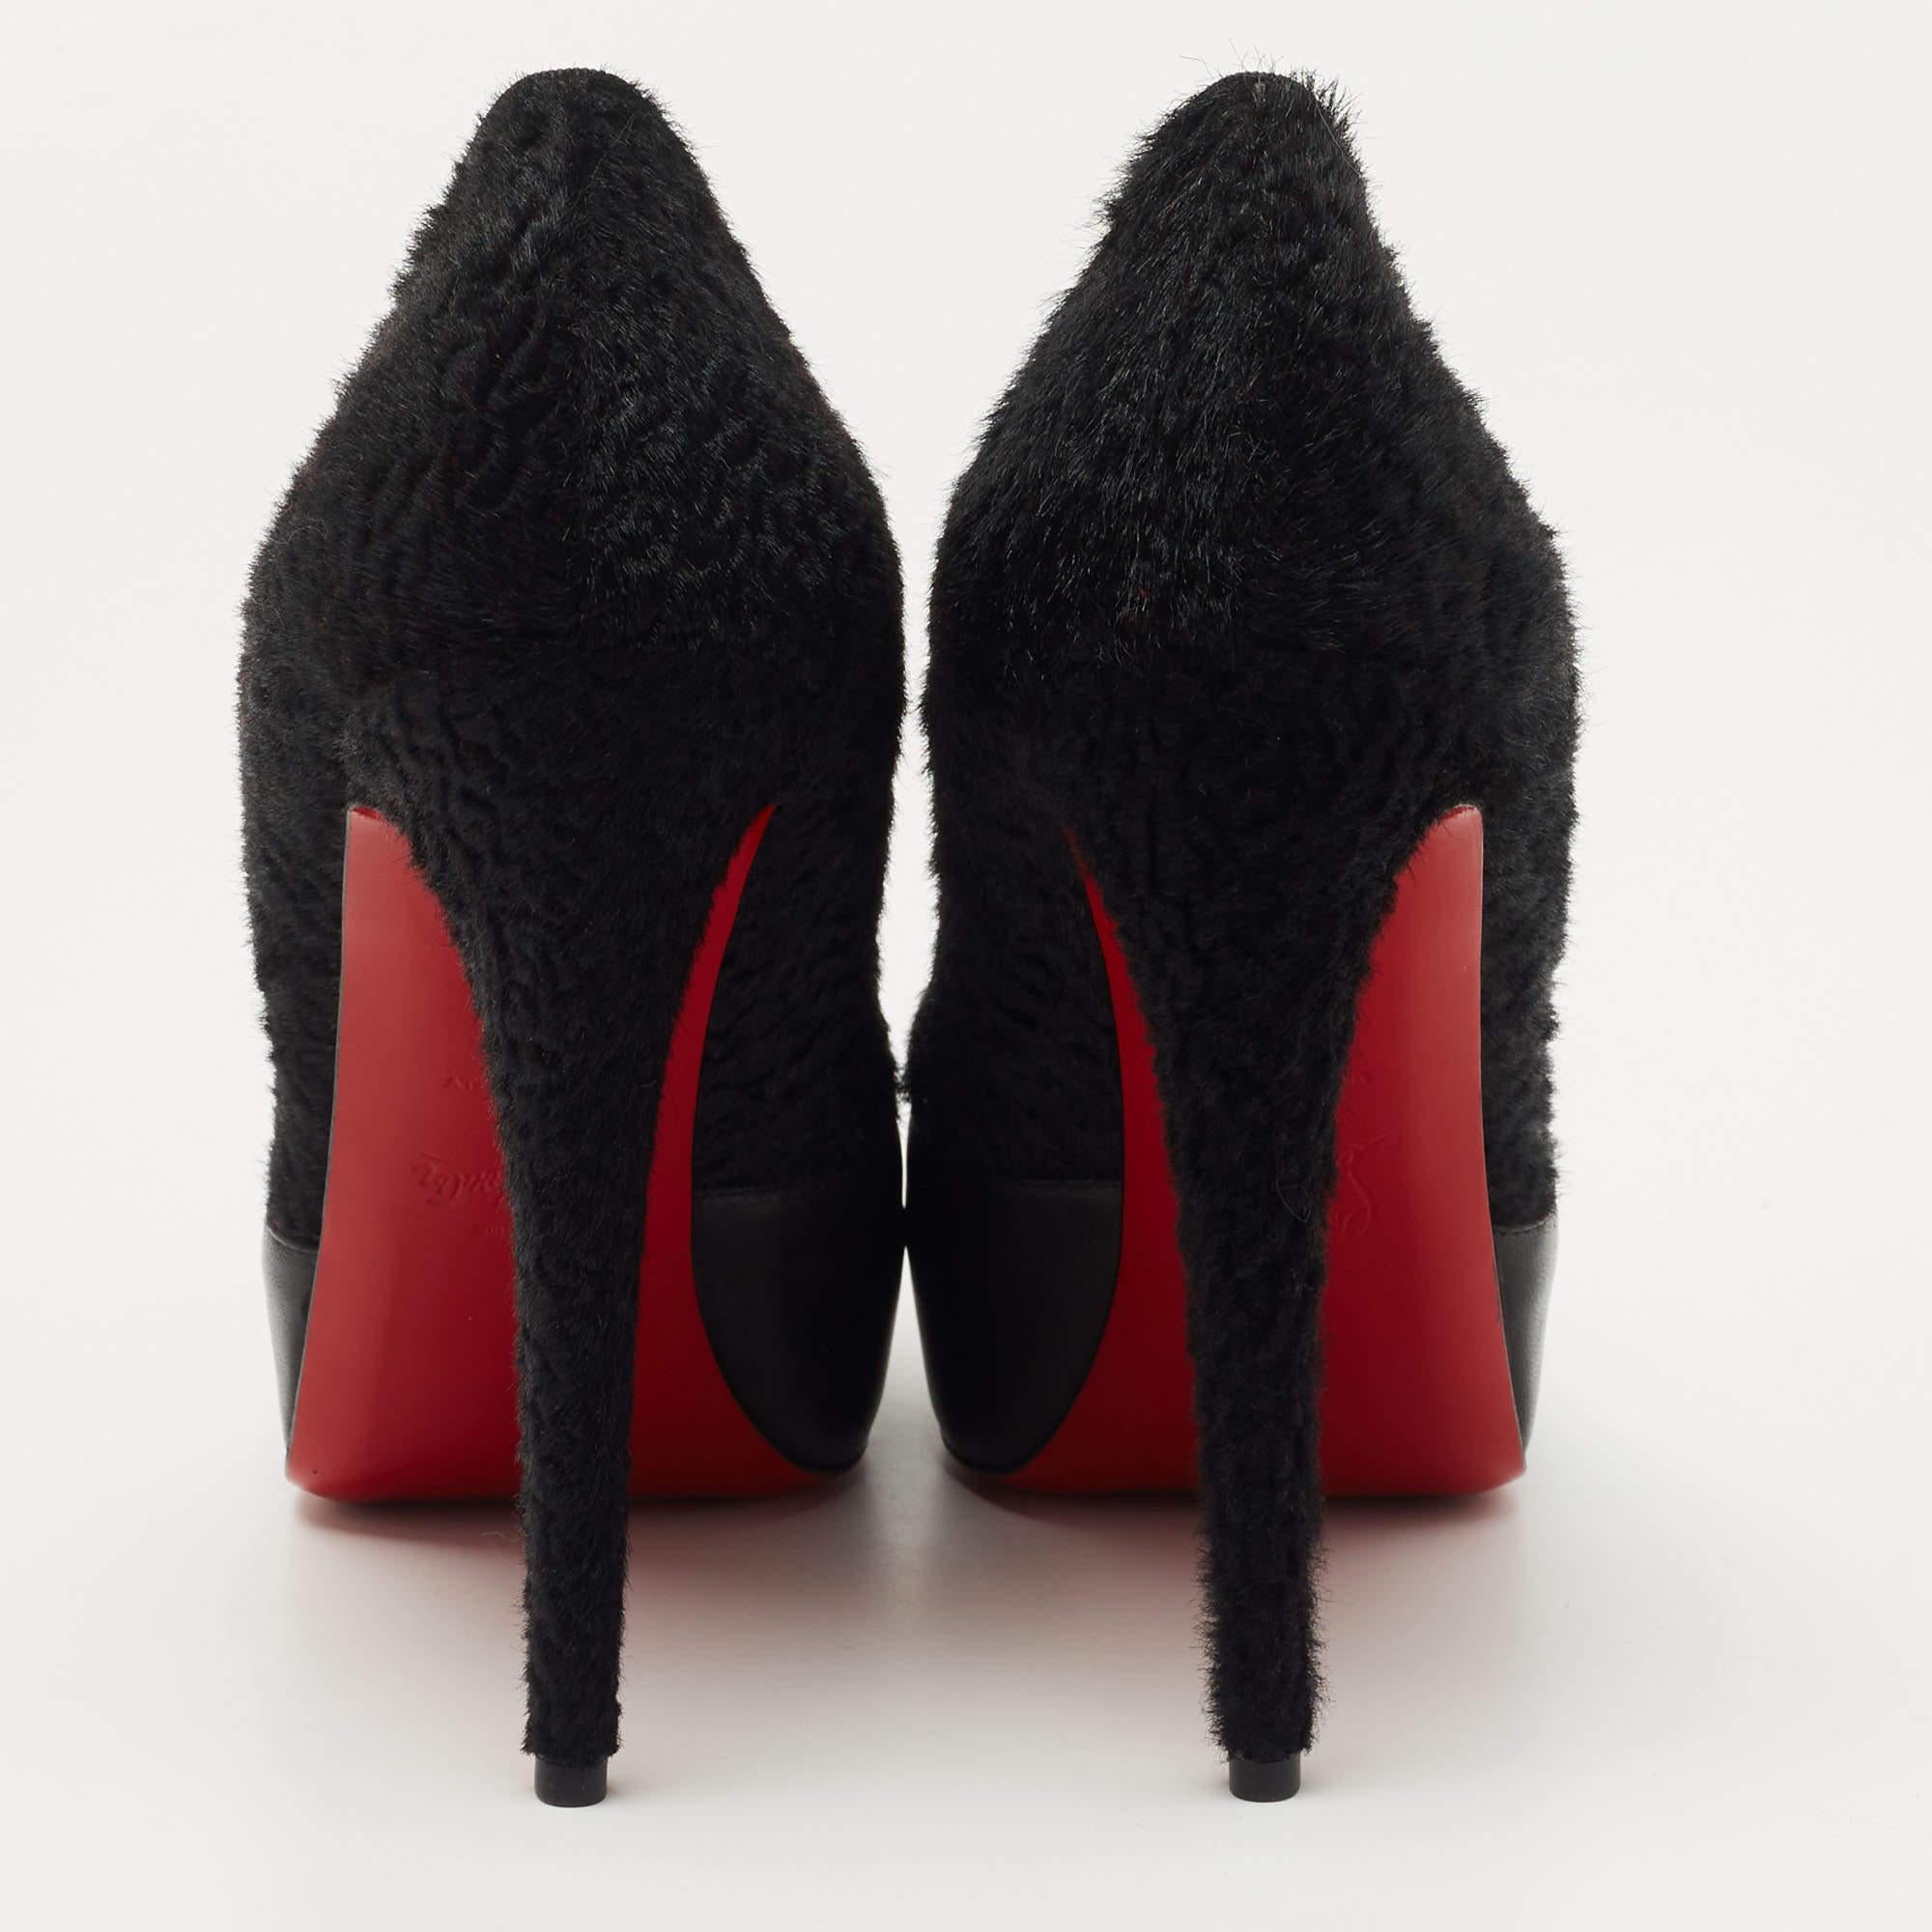 Christian Louboutin Black Calfhair and Leather Maggie Pumps Size 40 In New Condition For Sale In Dubai, Al Qouz 2